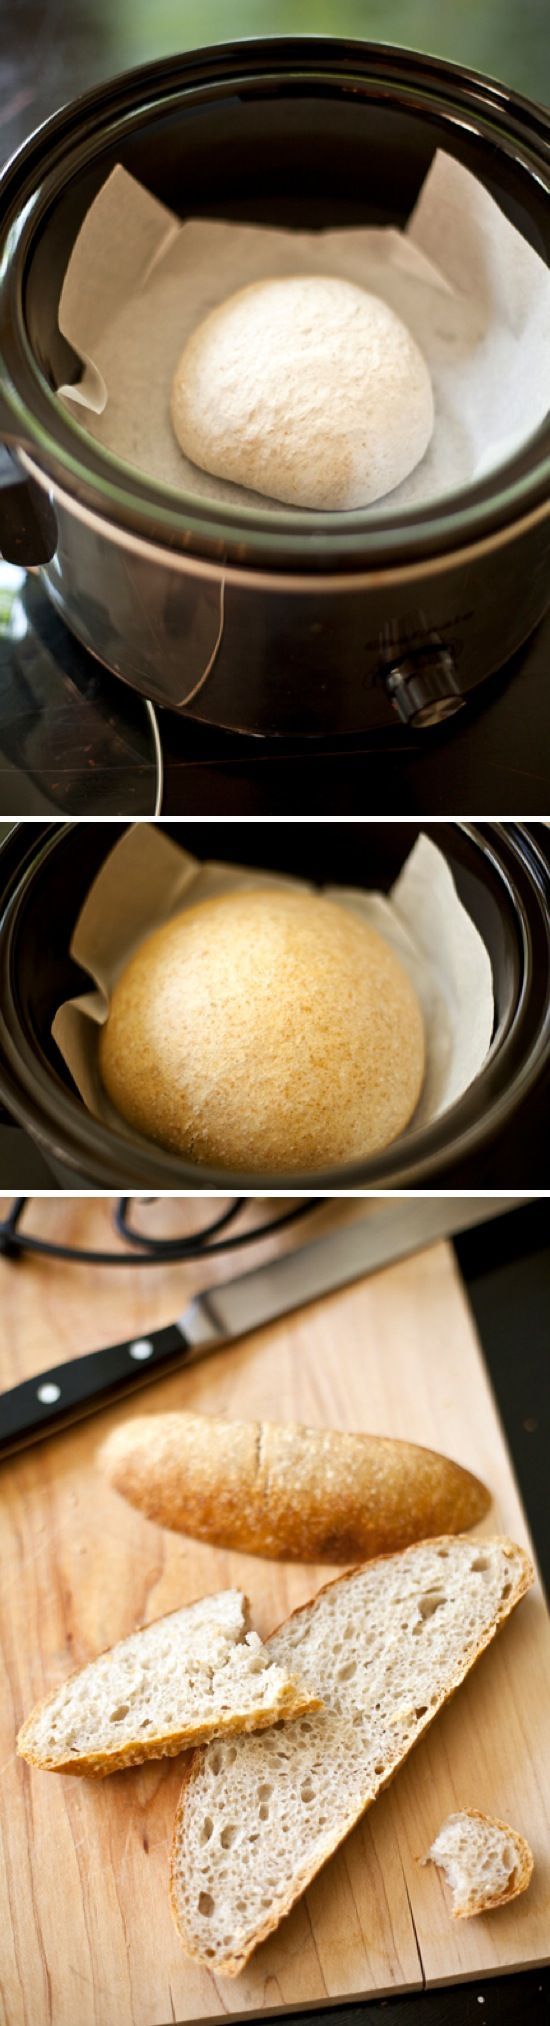 How To Bake Bread In A Crock Pot | Recipe By Photo